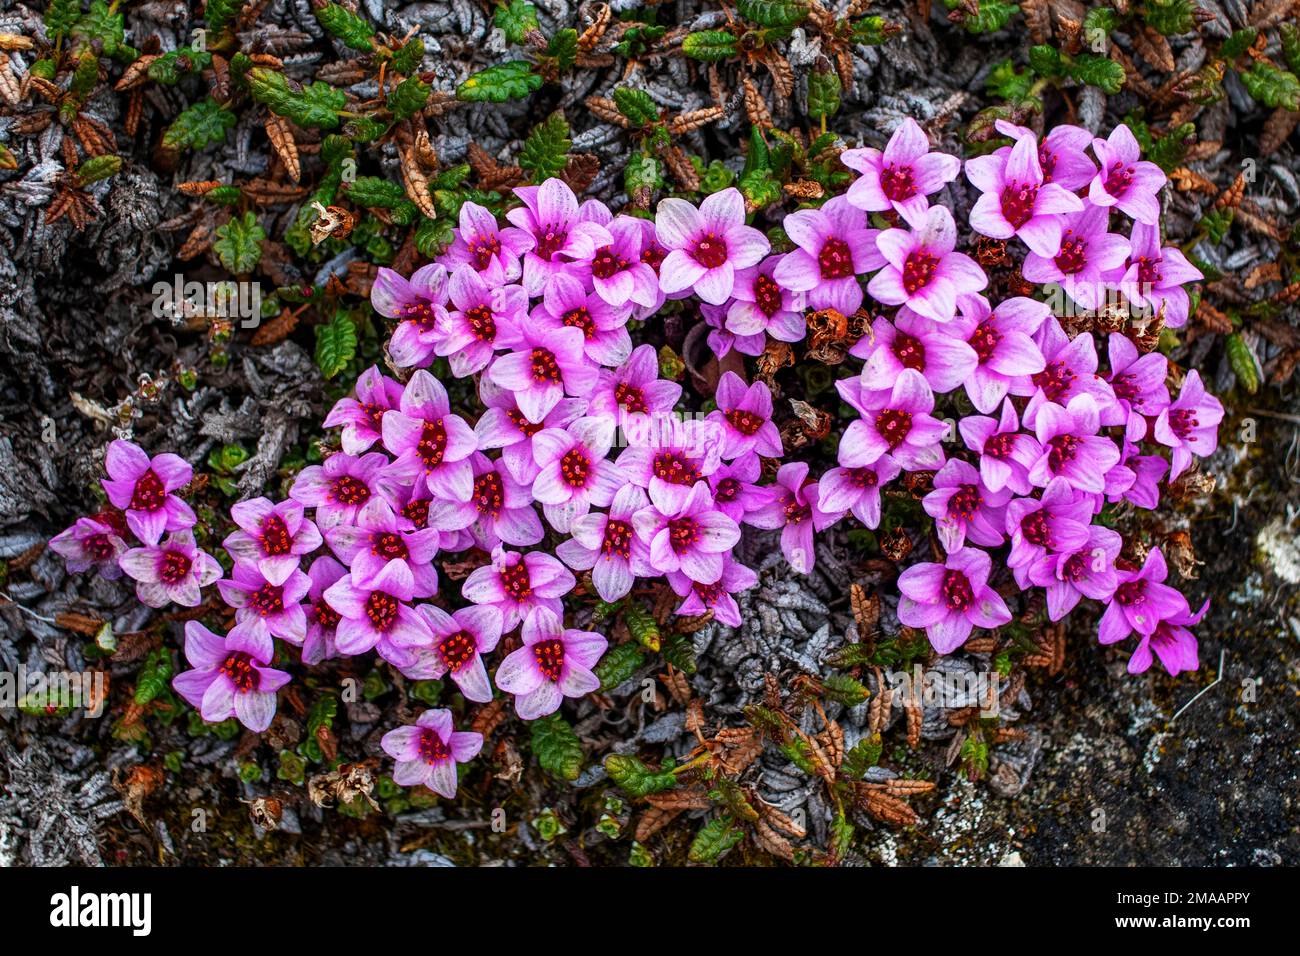 Picture of saxifrage (Saxifraga oppositifolia) flowers growing on the Svalbard tundra in Norway. Expedition cruise vessel Greg Mortimer in Svalbard ar Stock Photo